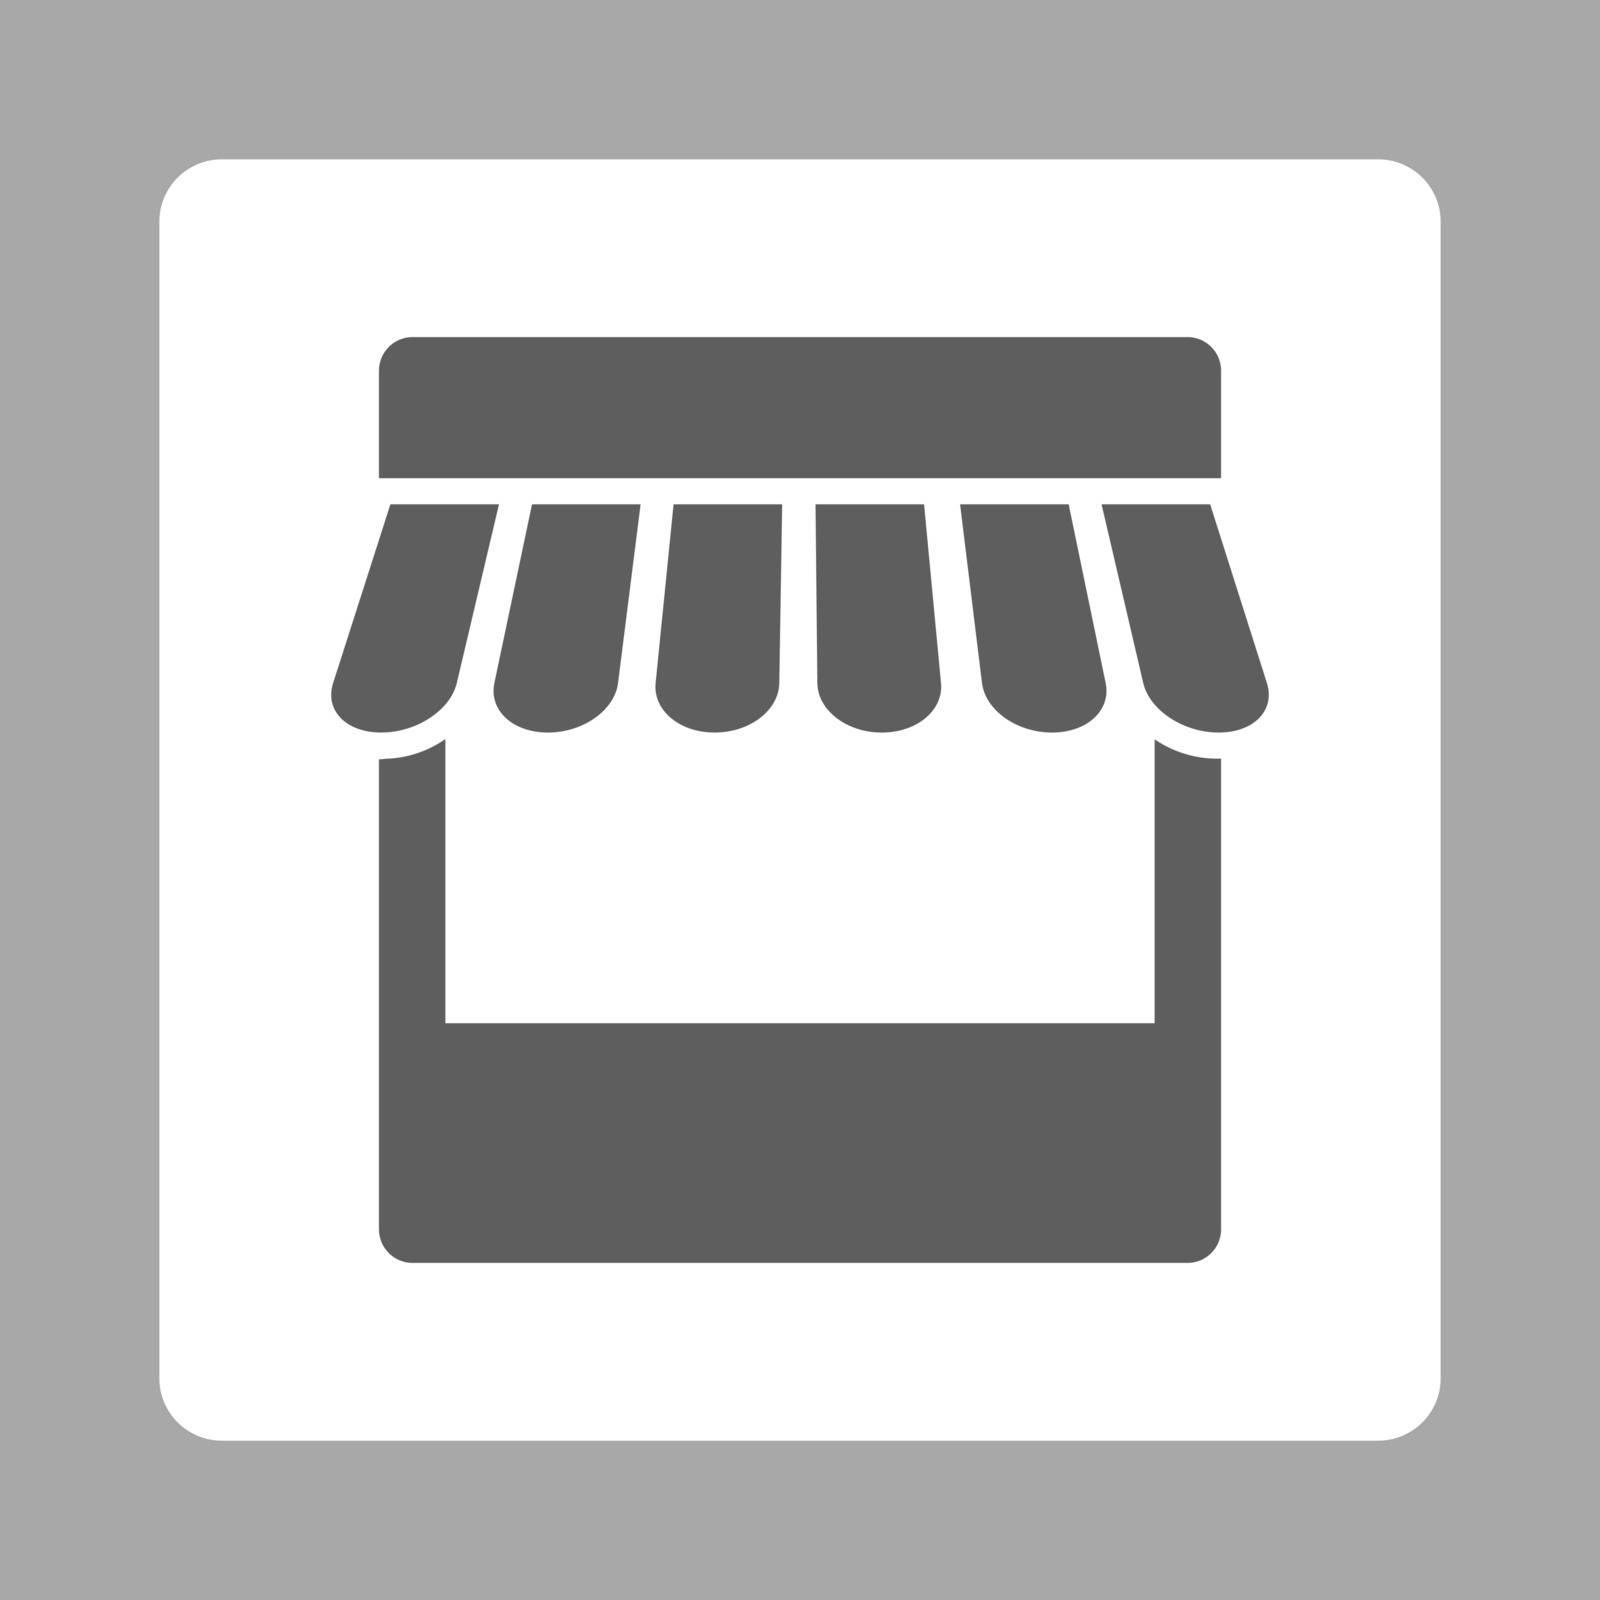 Store icon. Vector style is dark gray and white colors, flat rounded square button on a silver background.